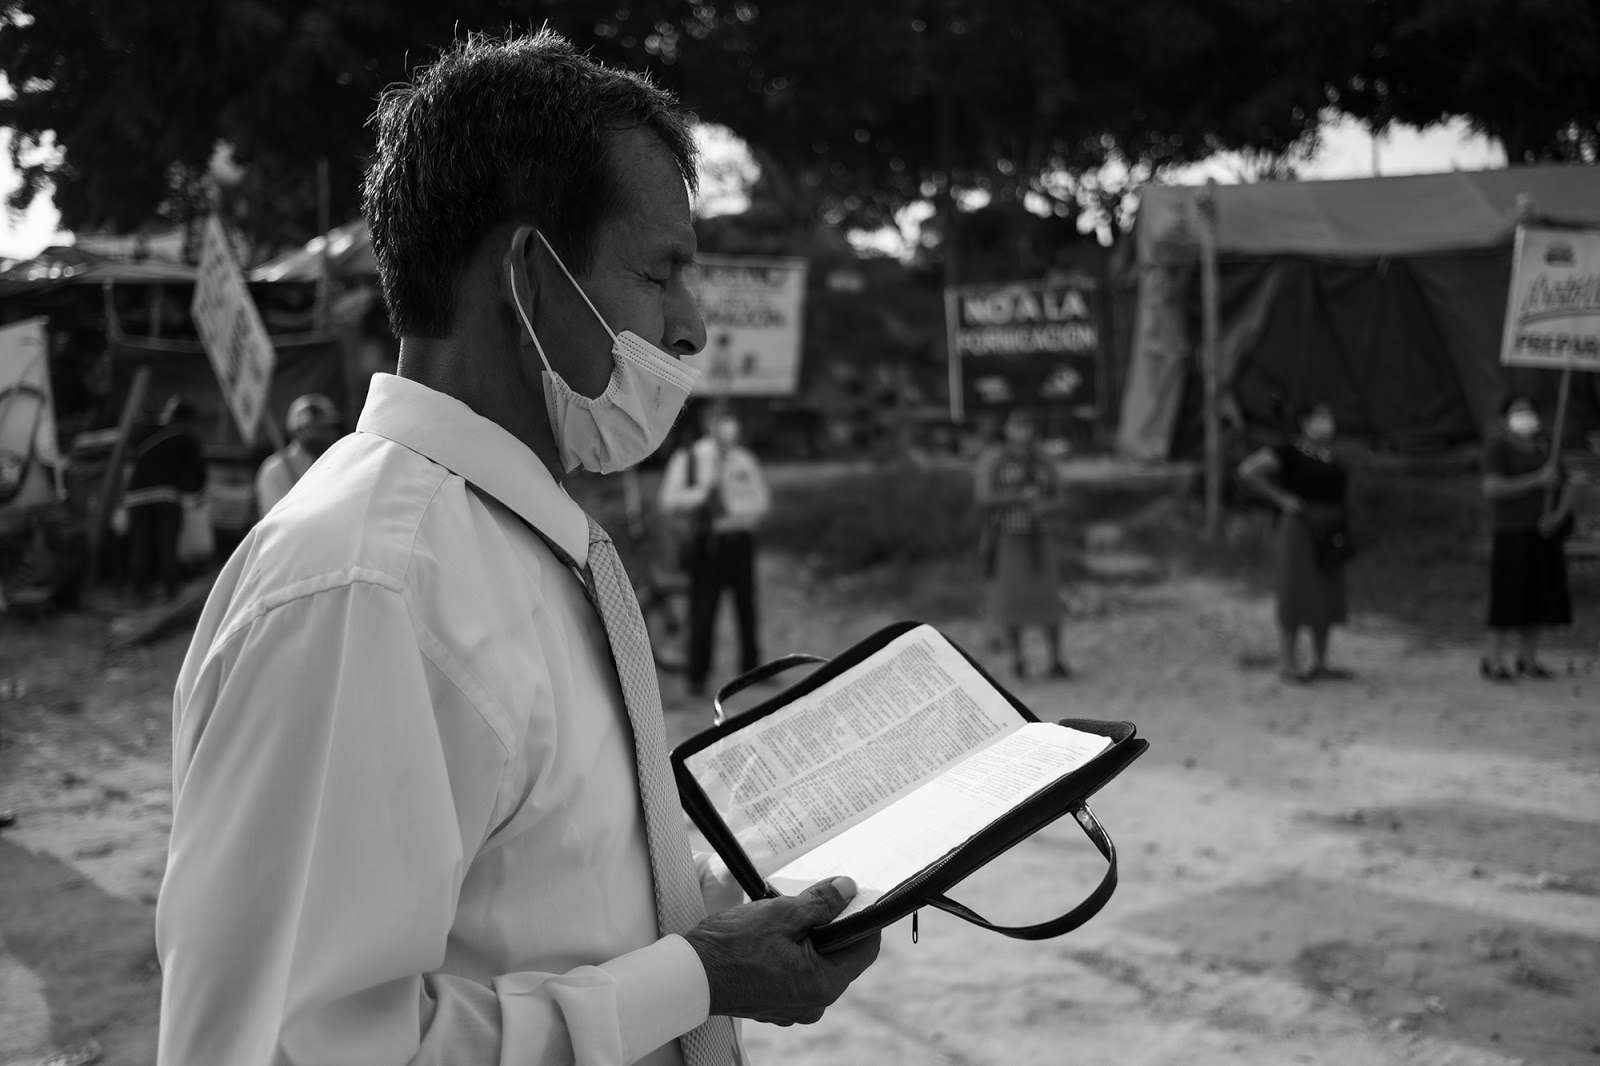 A preacher is standing holding a Bible, with his eyes closed and a medical mask on.